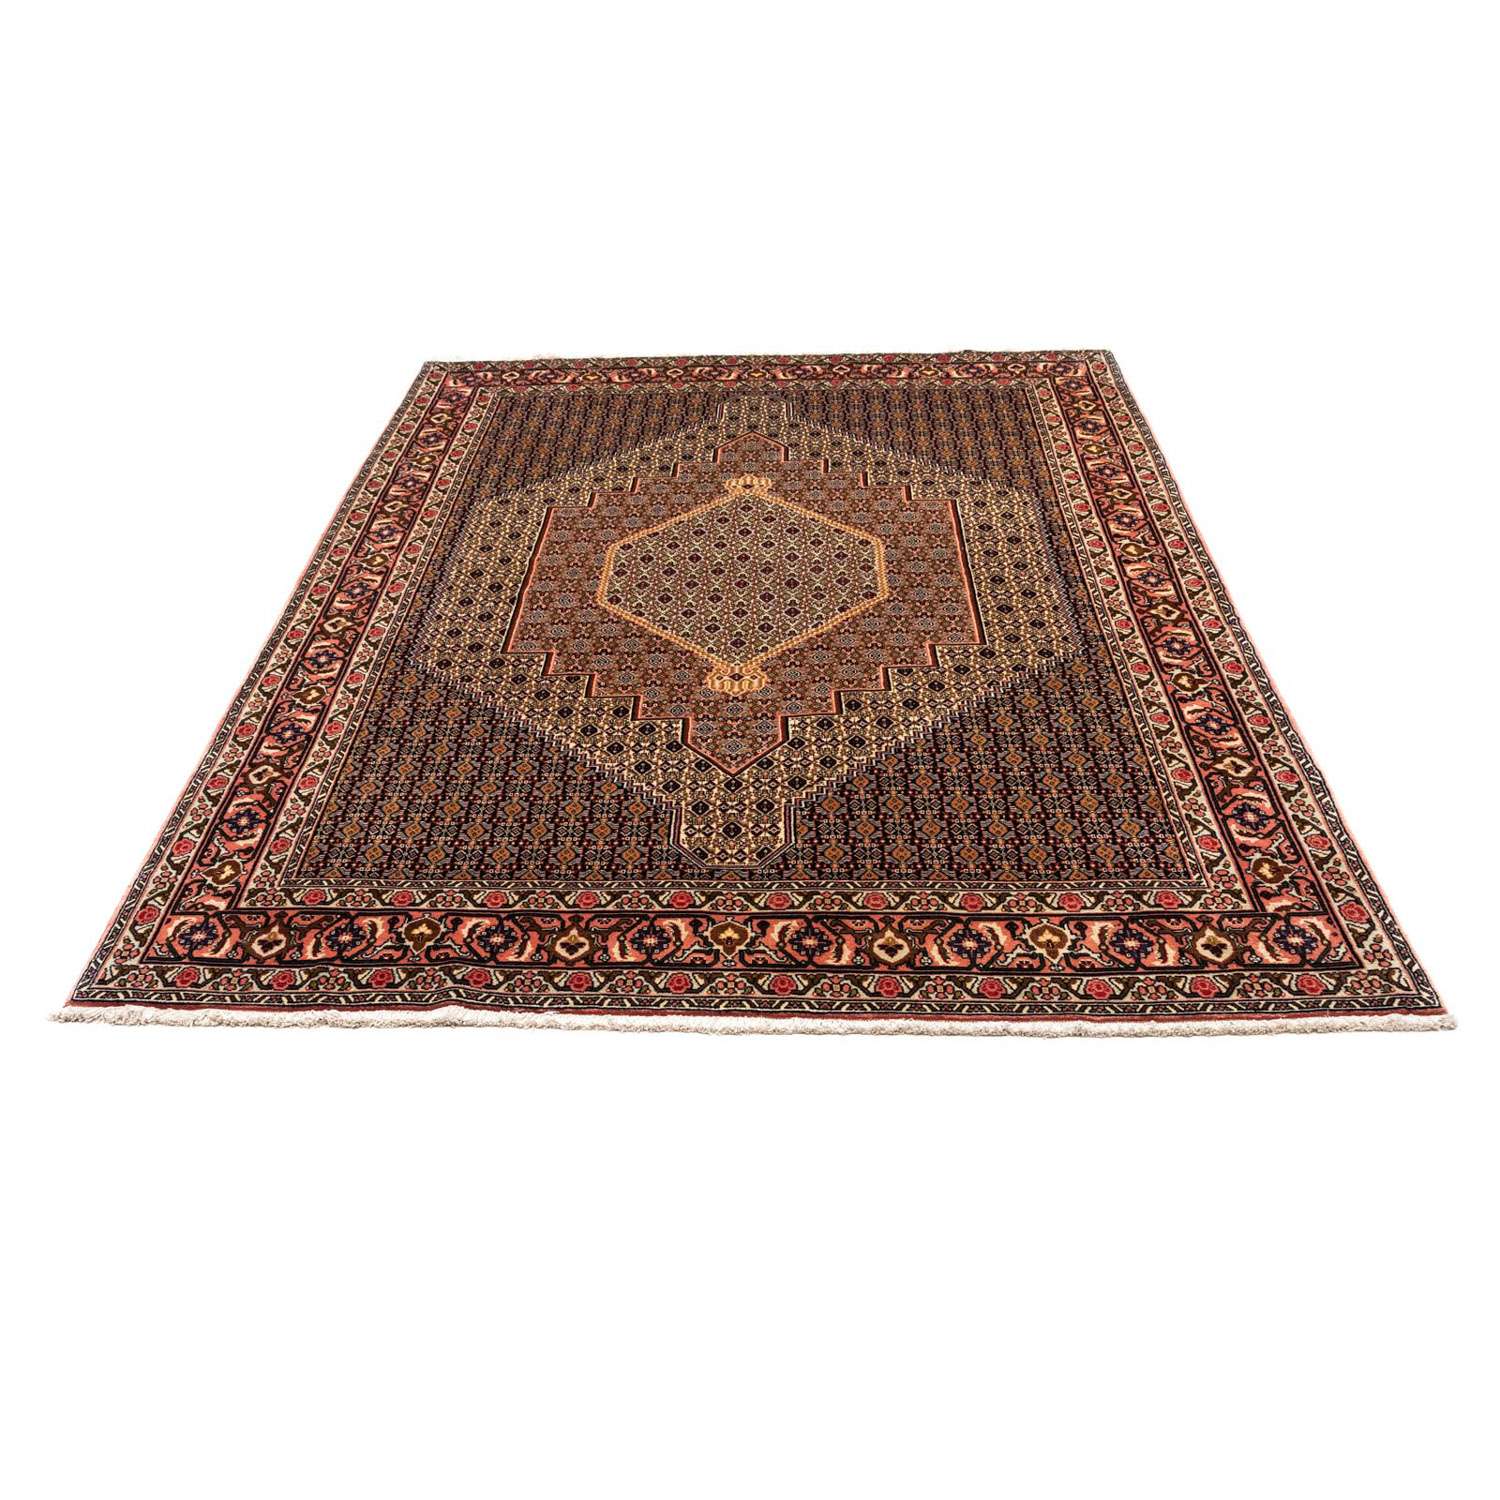 Perser Rug - Classic - 297 x 200 cm - light red